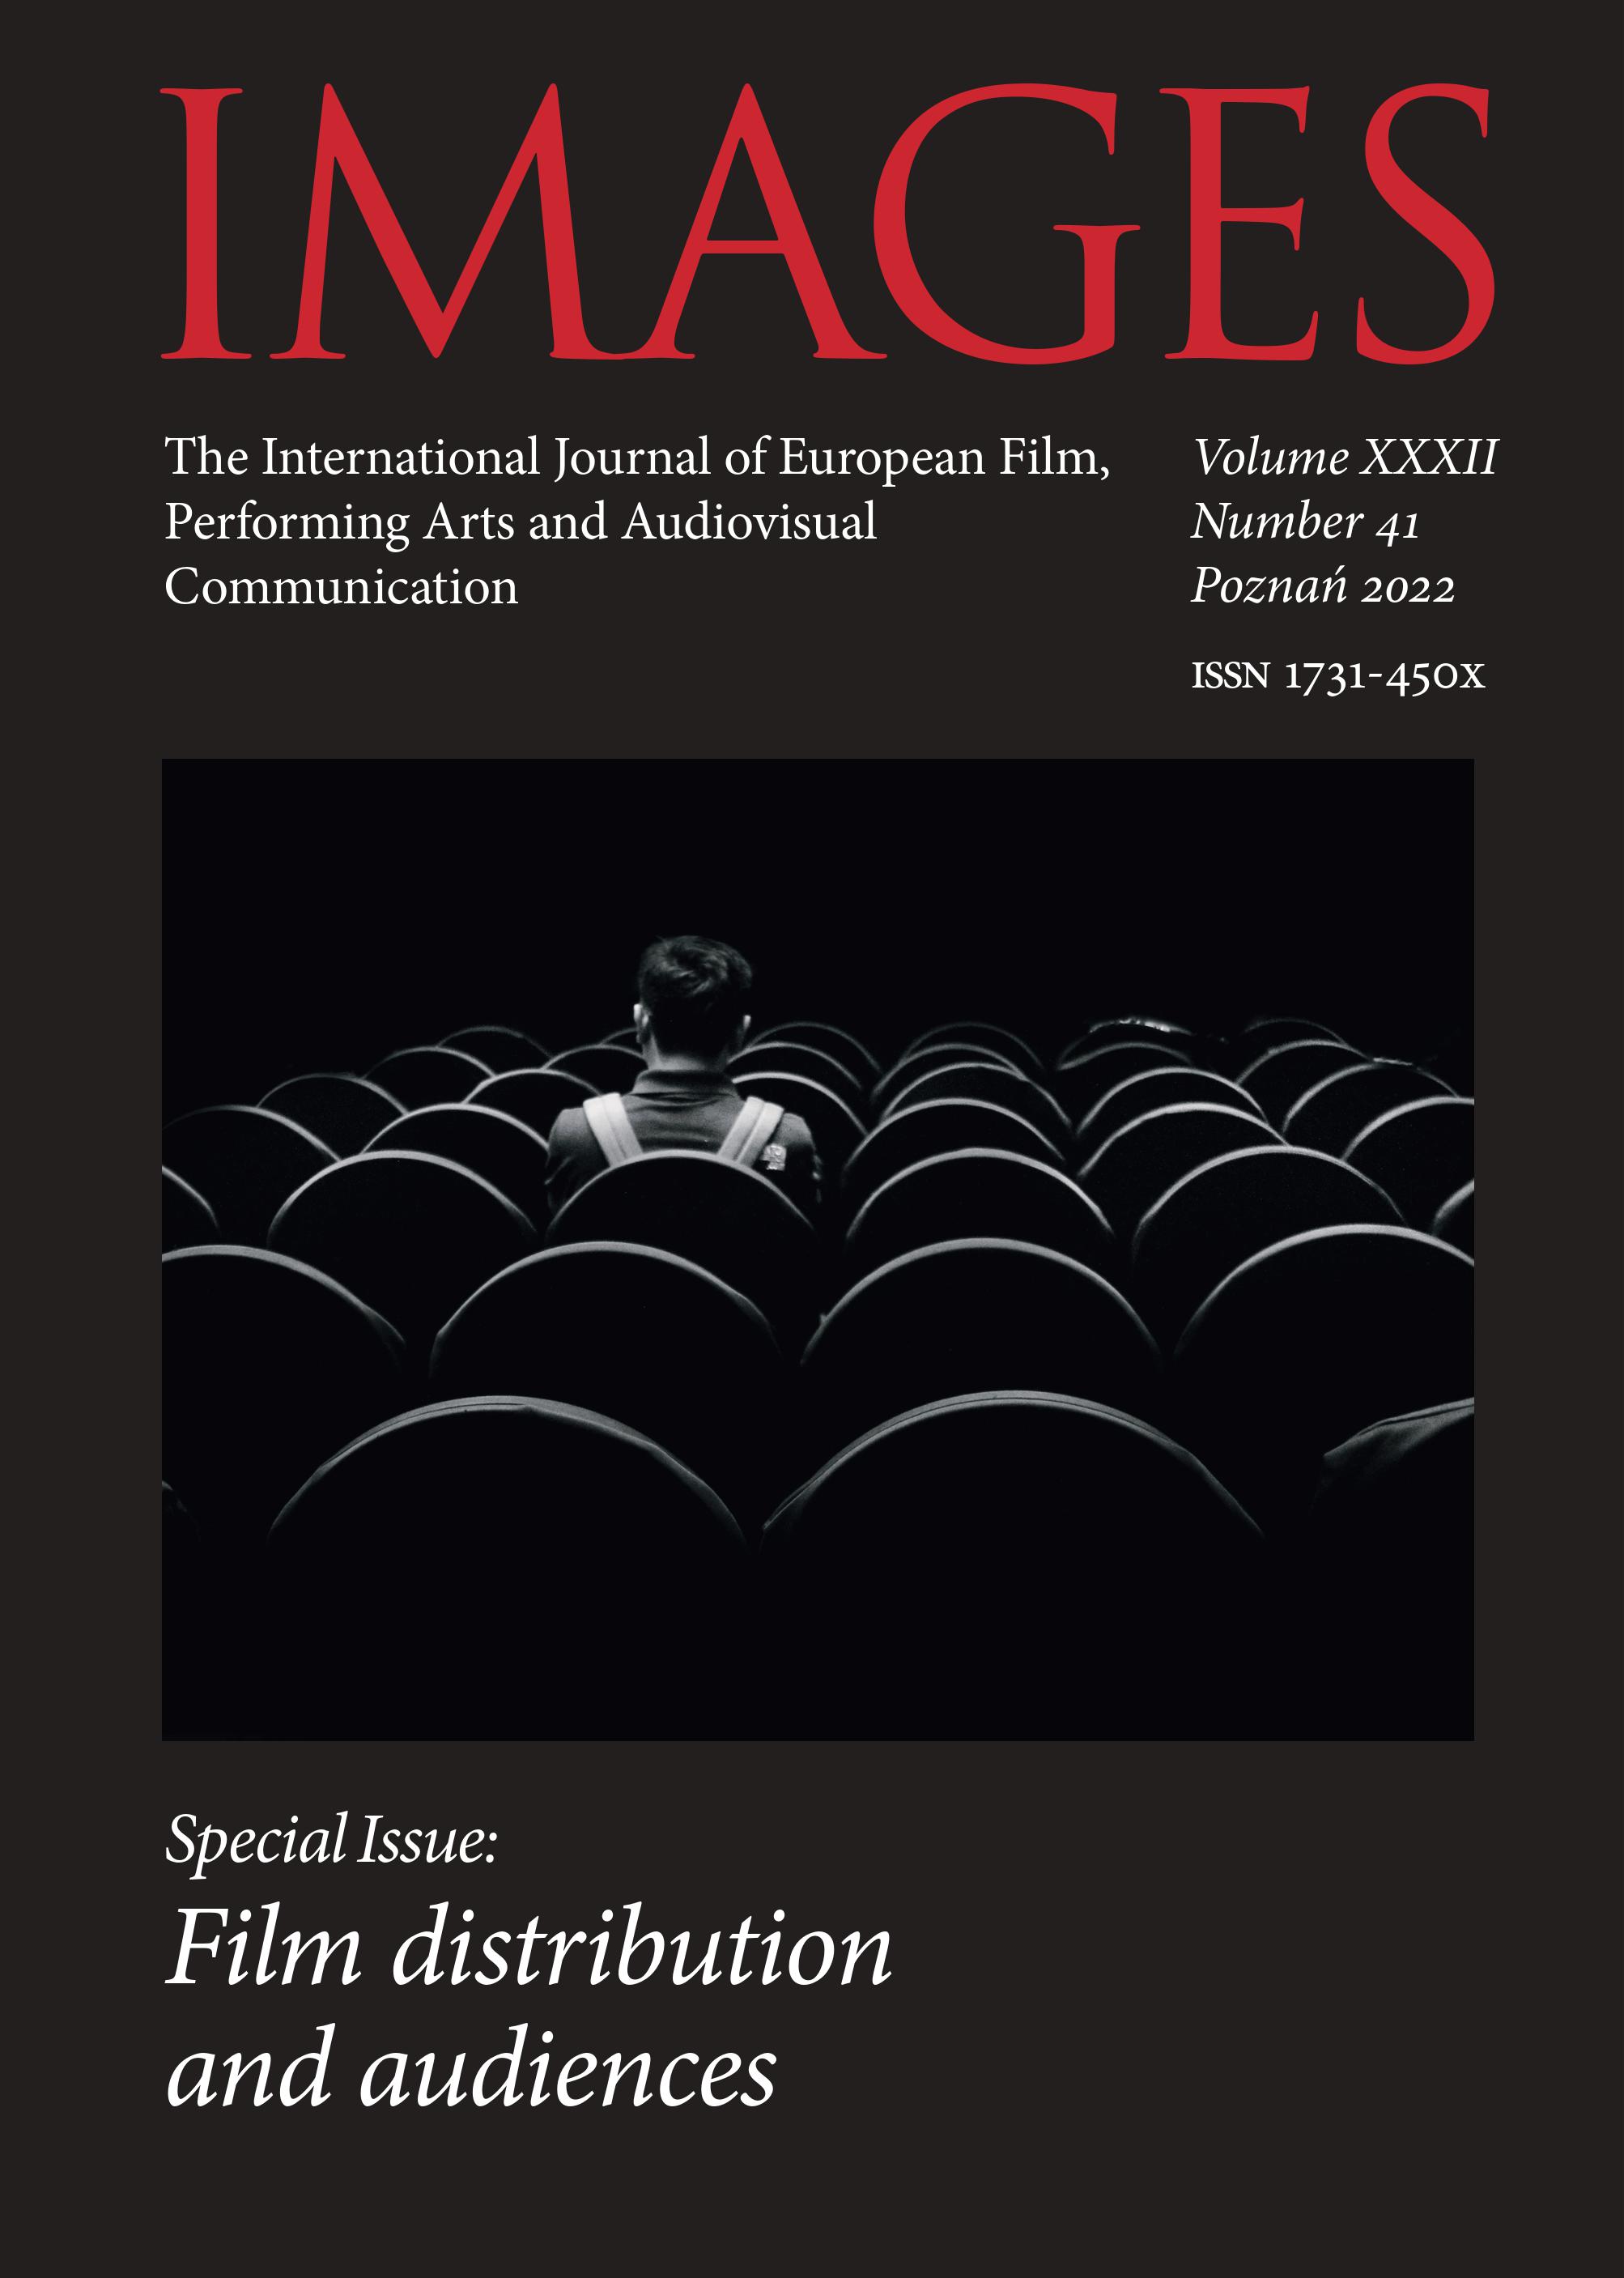 Local and Global Framework of Early Cinema in Lithuania: Vilnius Cinemas, Programme Formats and Audience Cover Image